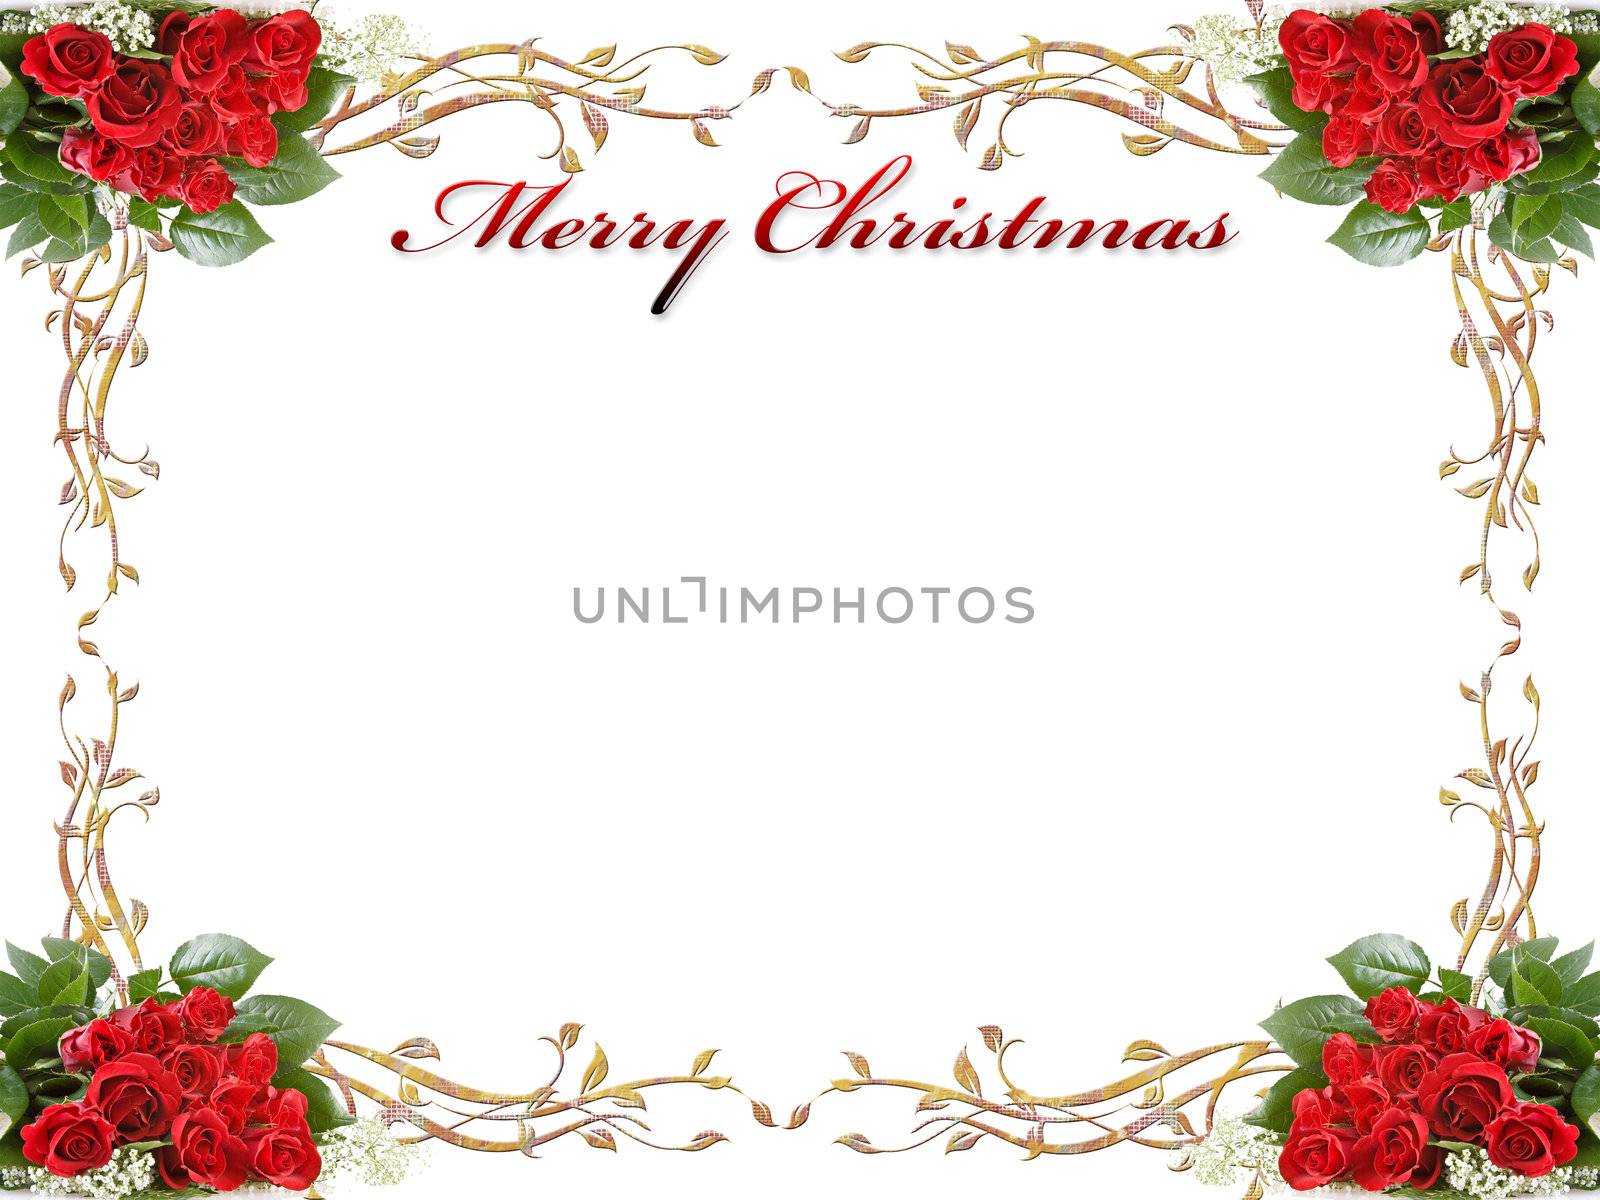 christmas background with roses and leaves by dacasdo